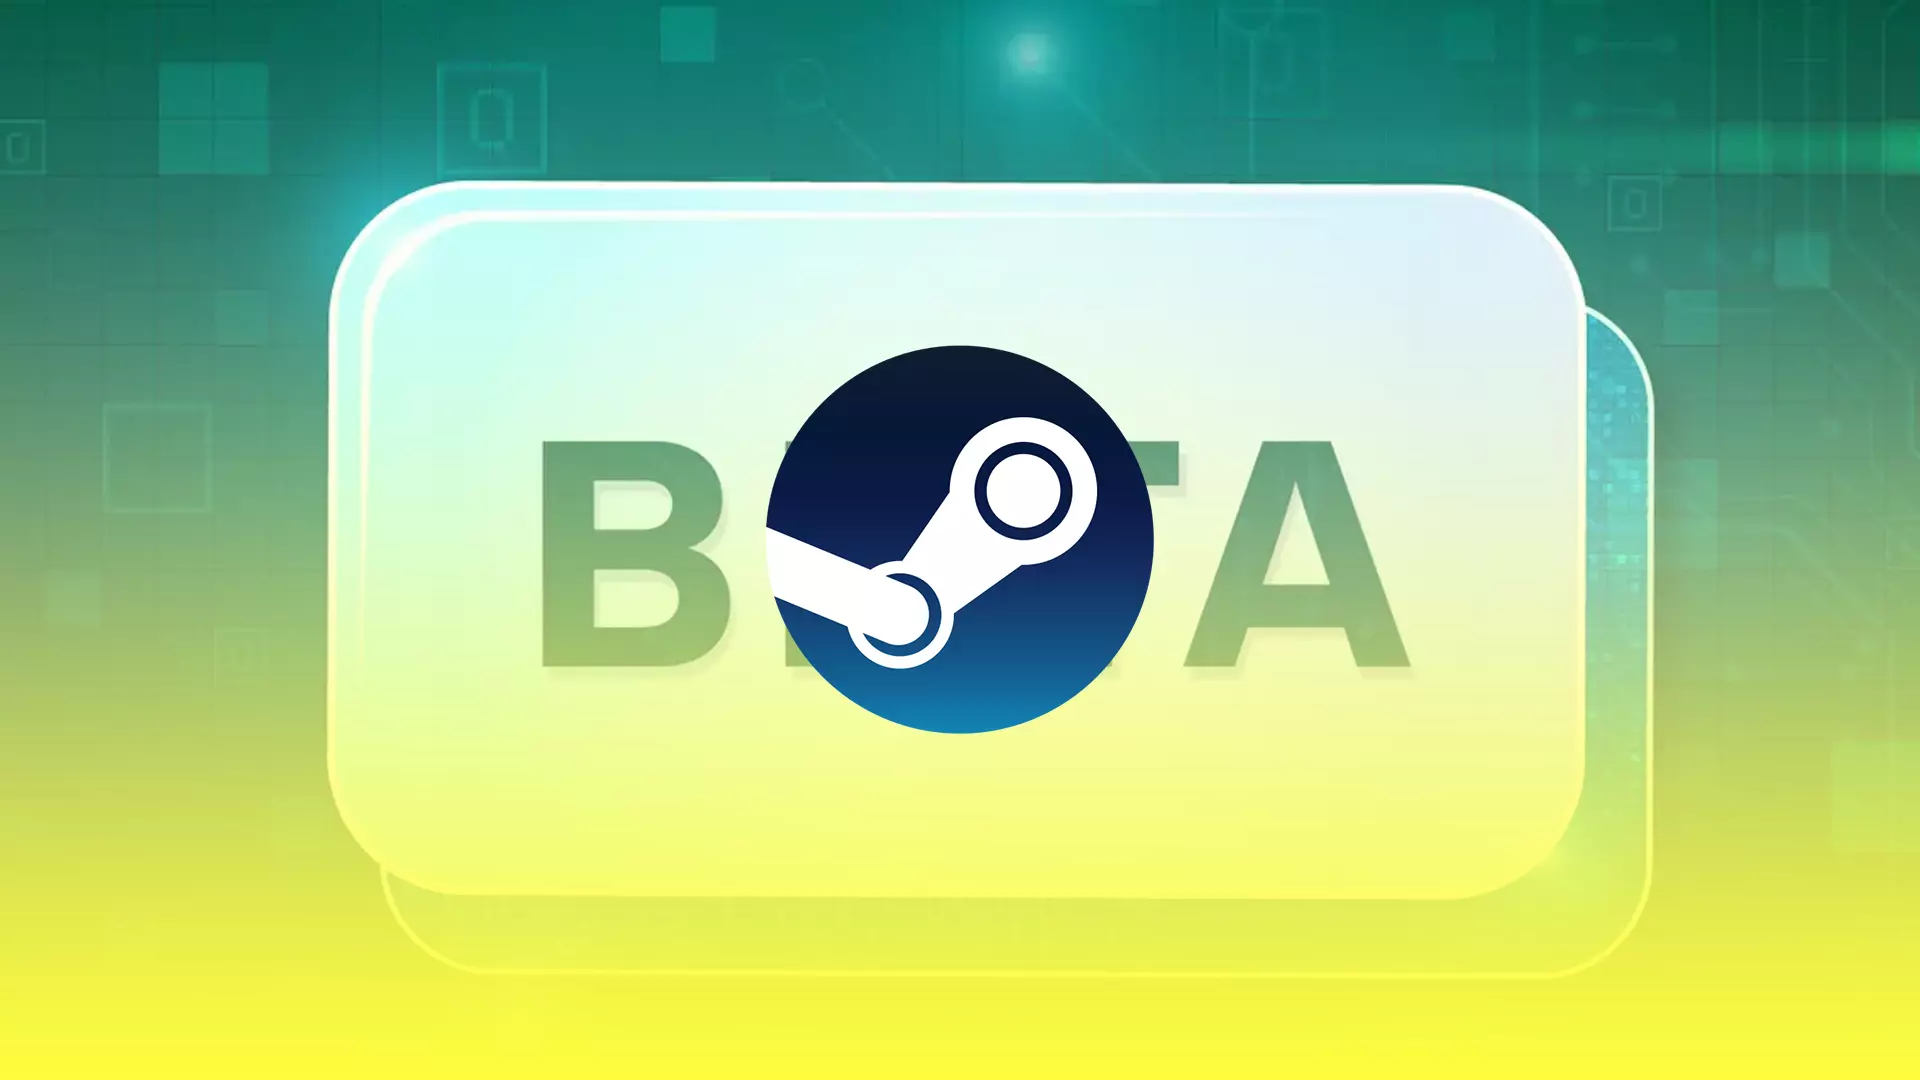 Steam beta version with updated design is already being tested by some users